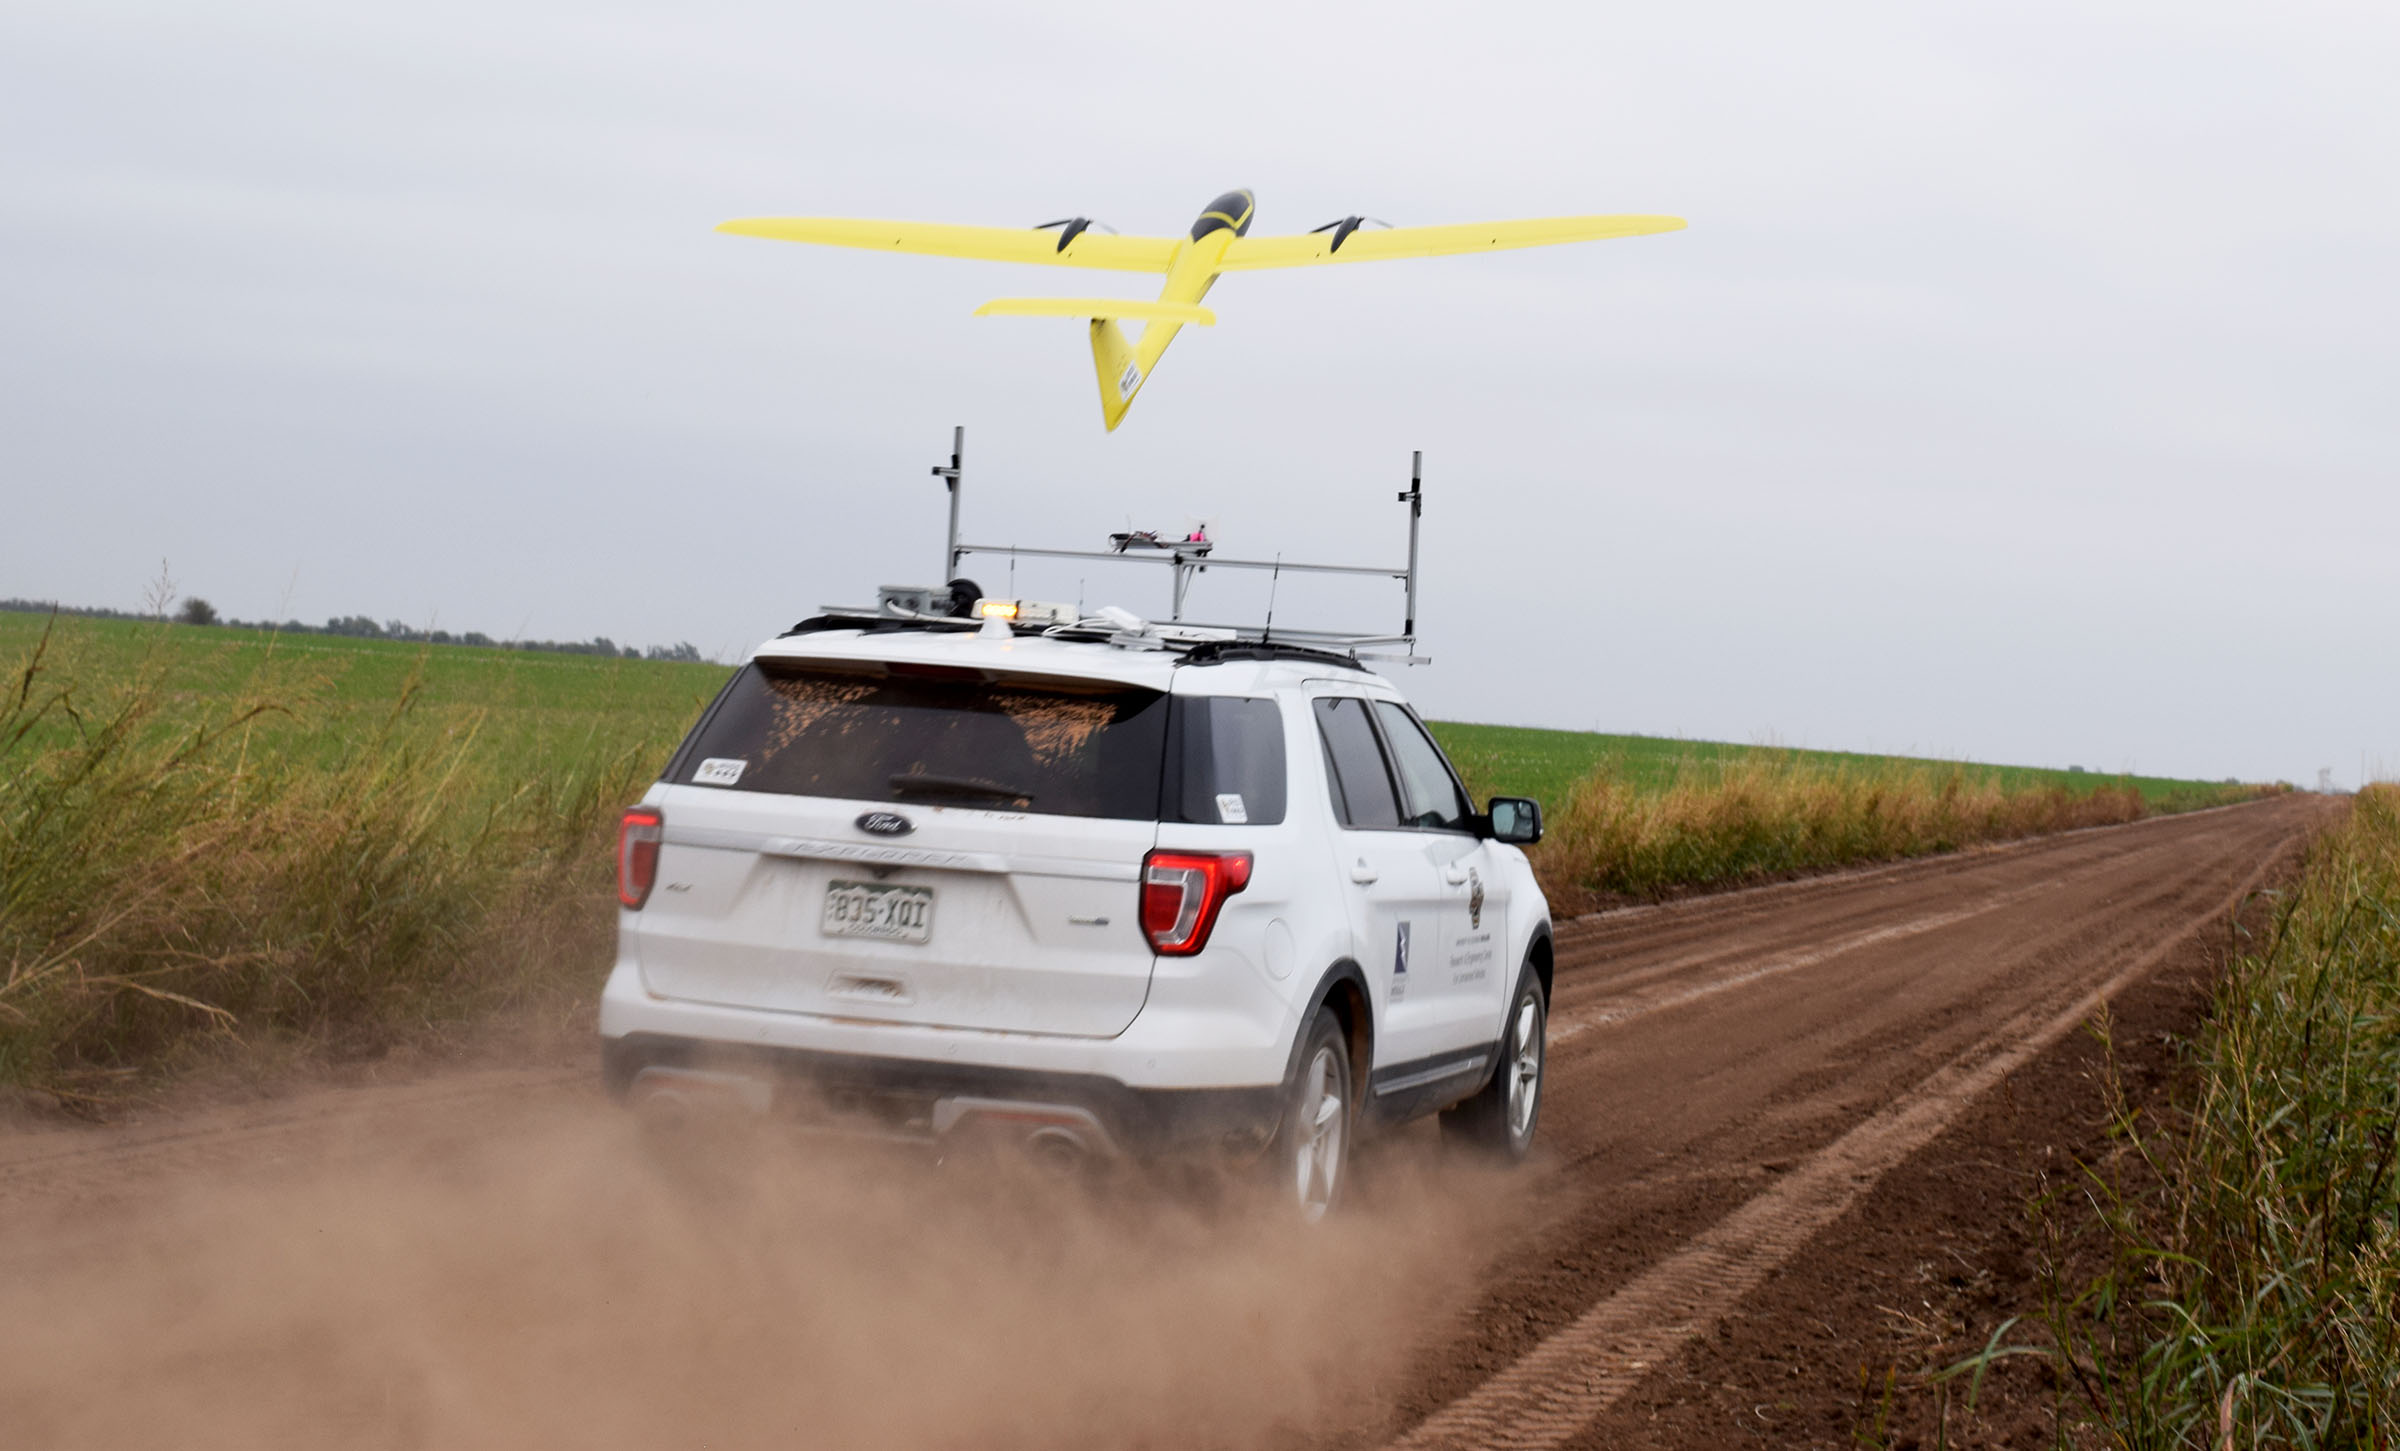 Project using unmanned aerial systems starts May 8